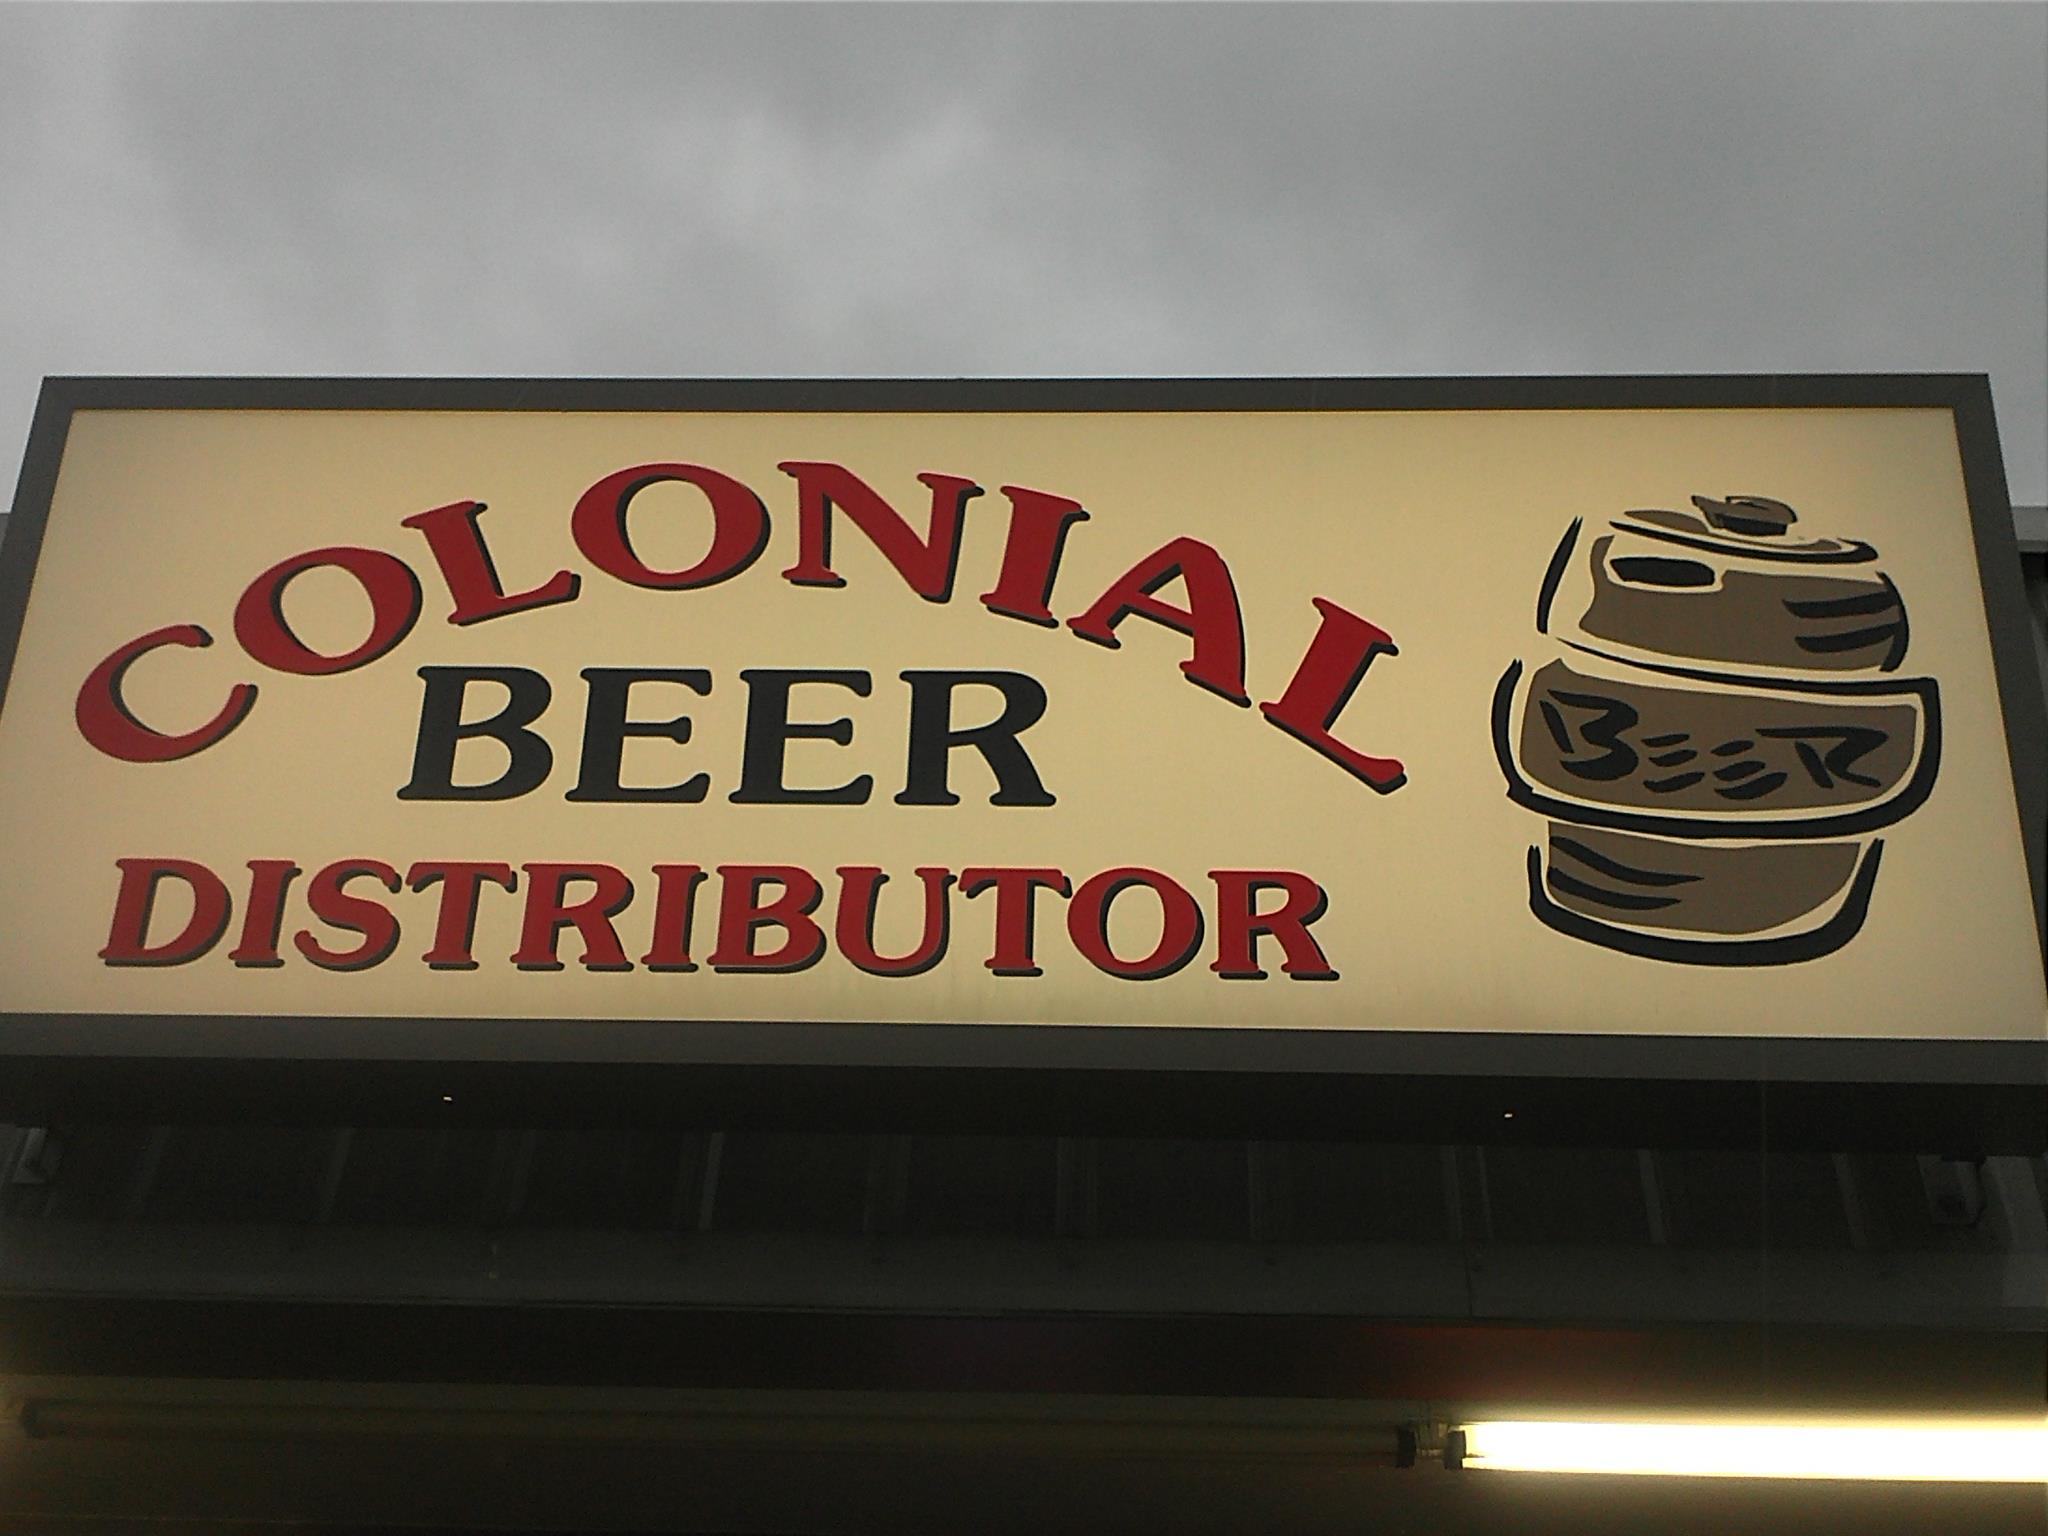 Colonial Beer & Soft Drink